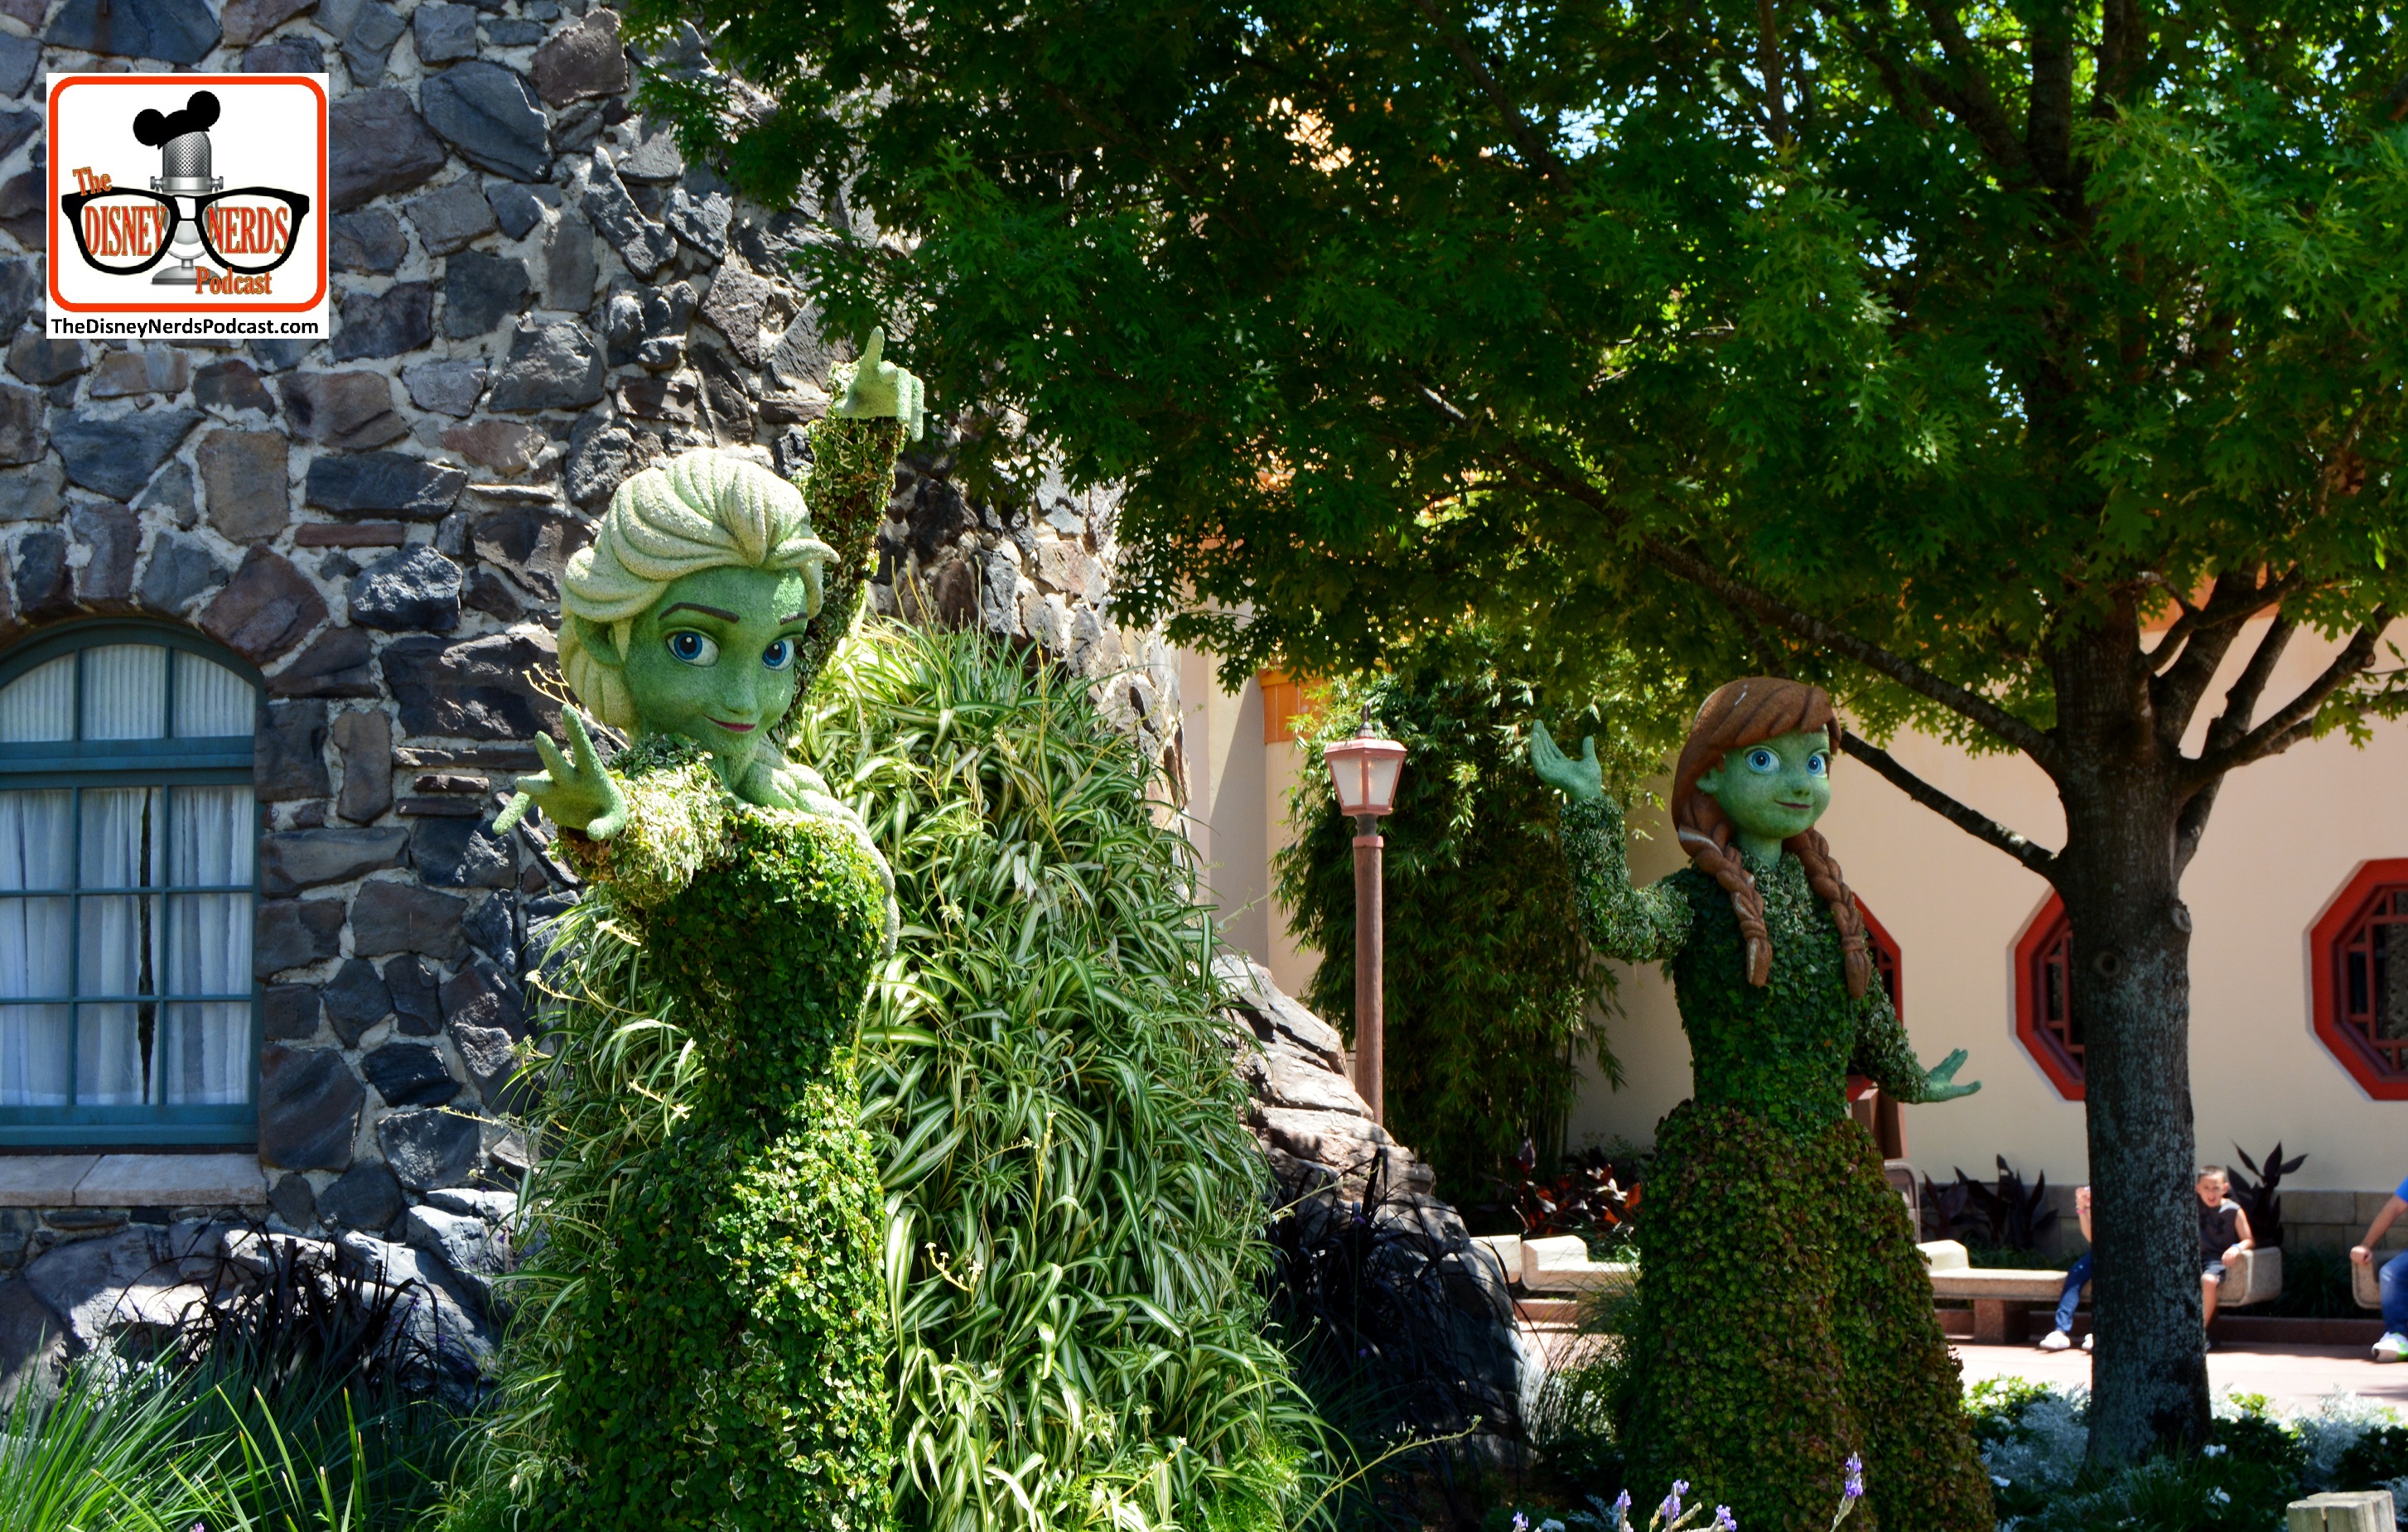 DNP April 2016 Photo Report: Epcot Flower and Garden Festival. Anna and Elso in Norway this year